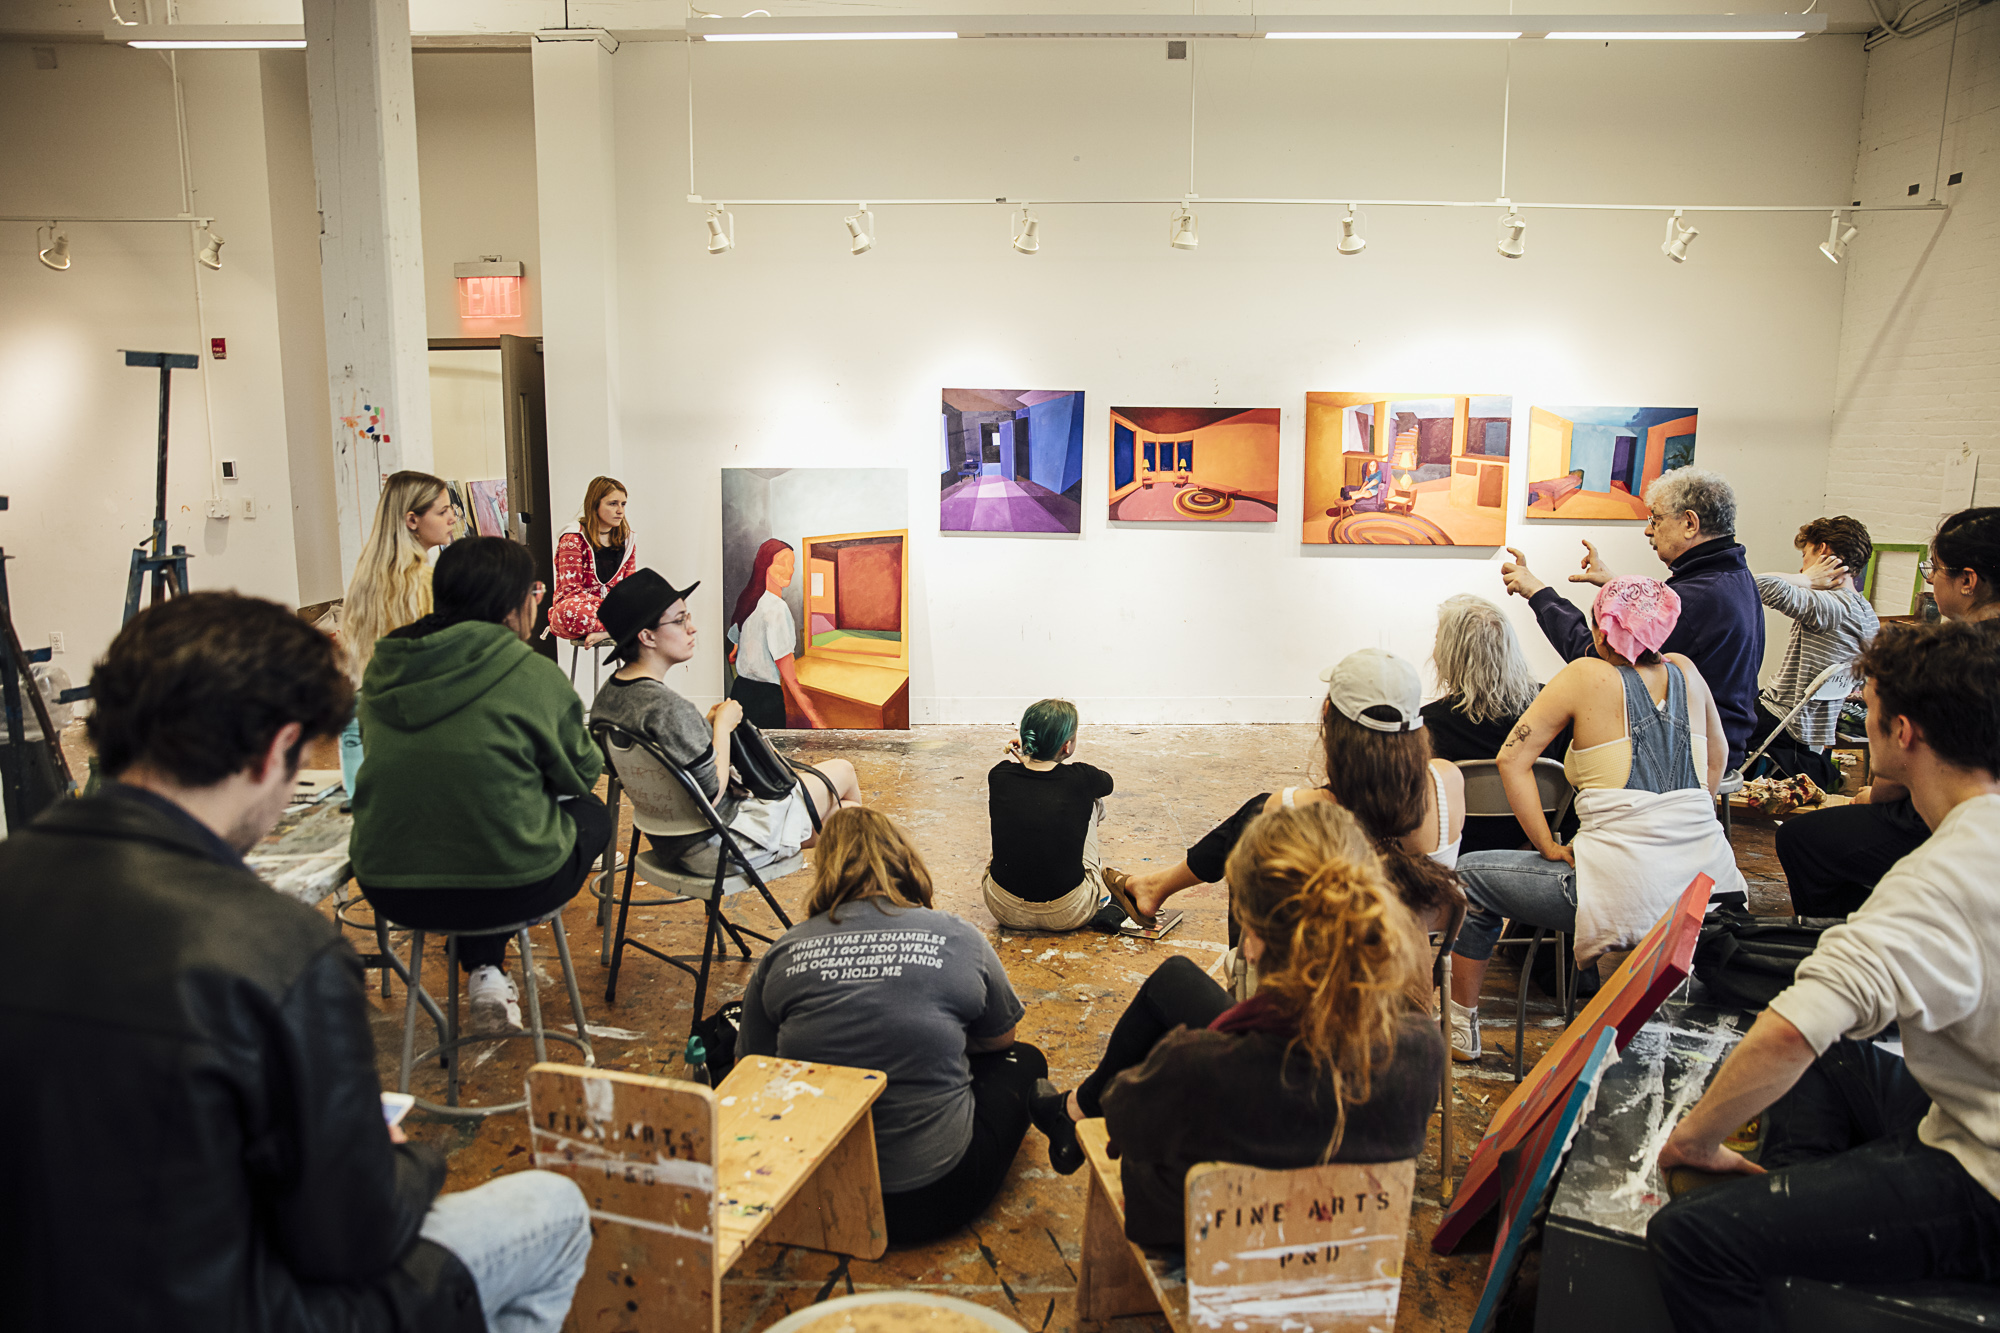 Students sit in a painting studio as a professor lectures on 5 paintings shown at the front of the classroom.